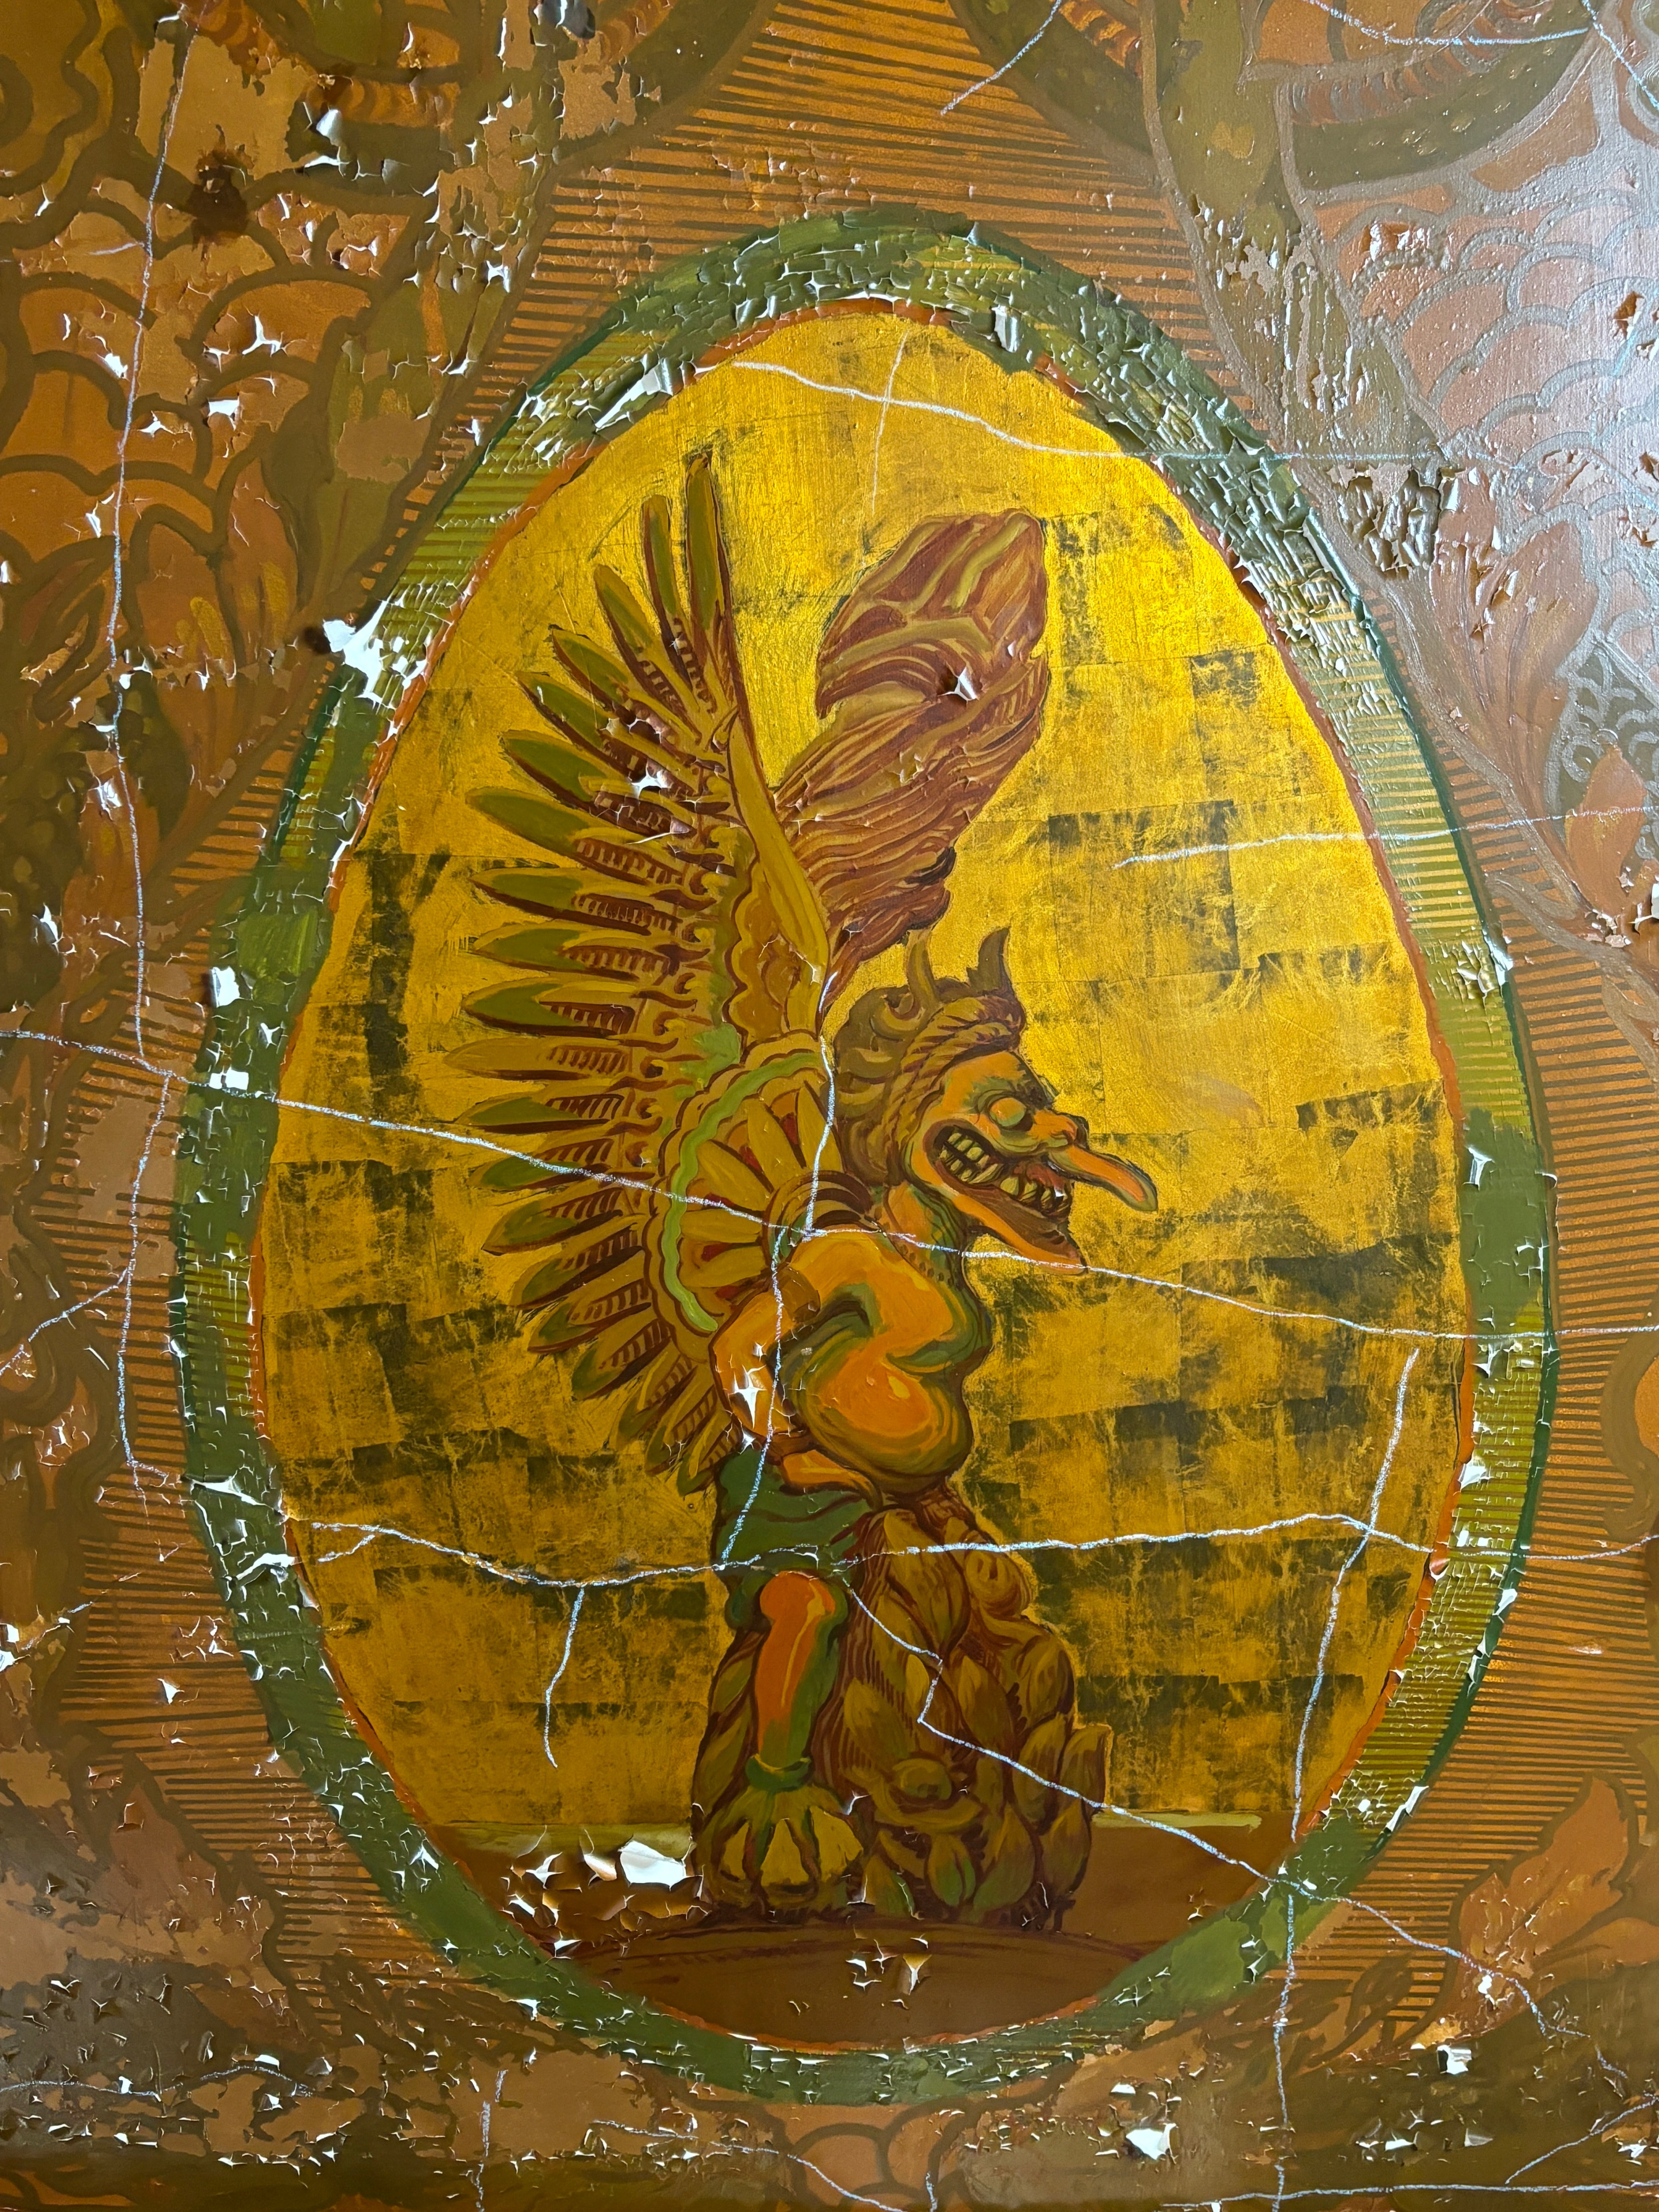 a detail from a ceiling shows a winged, god-like figure in profile on a cracked and yellowed oval